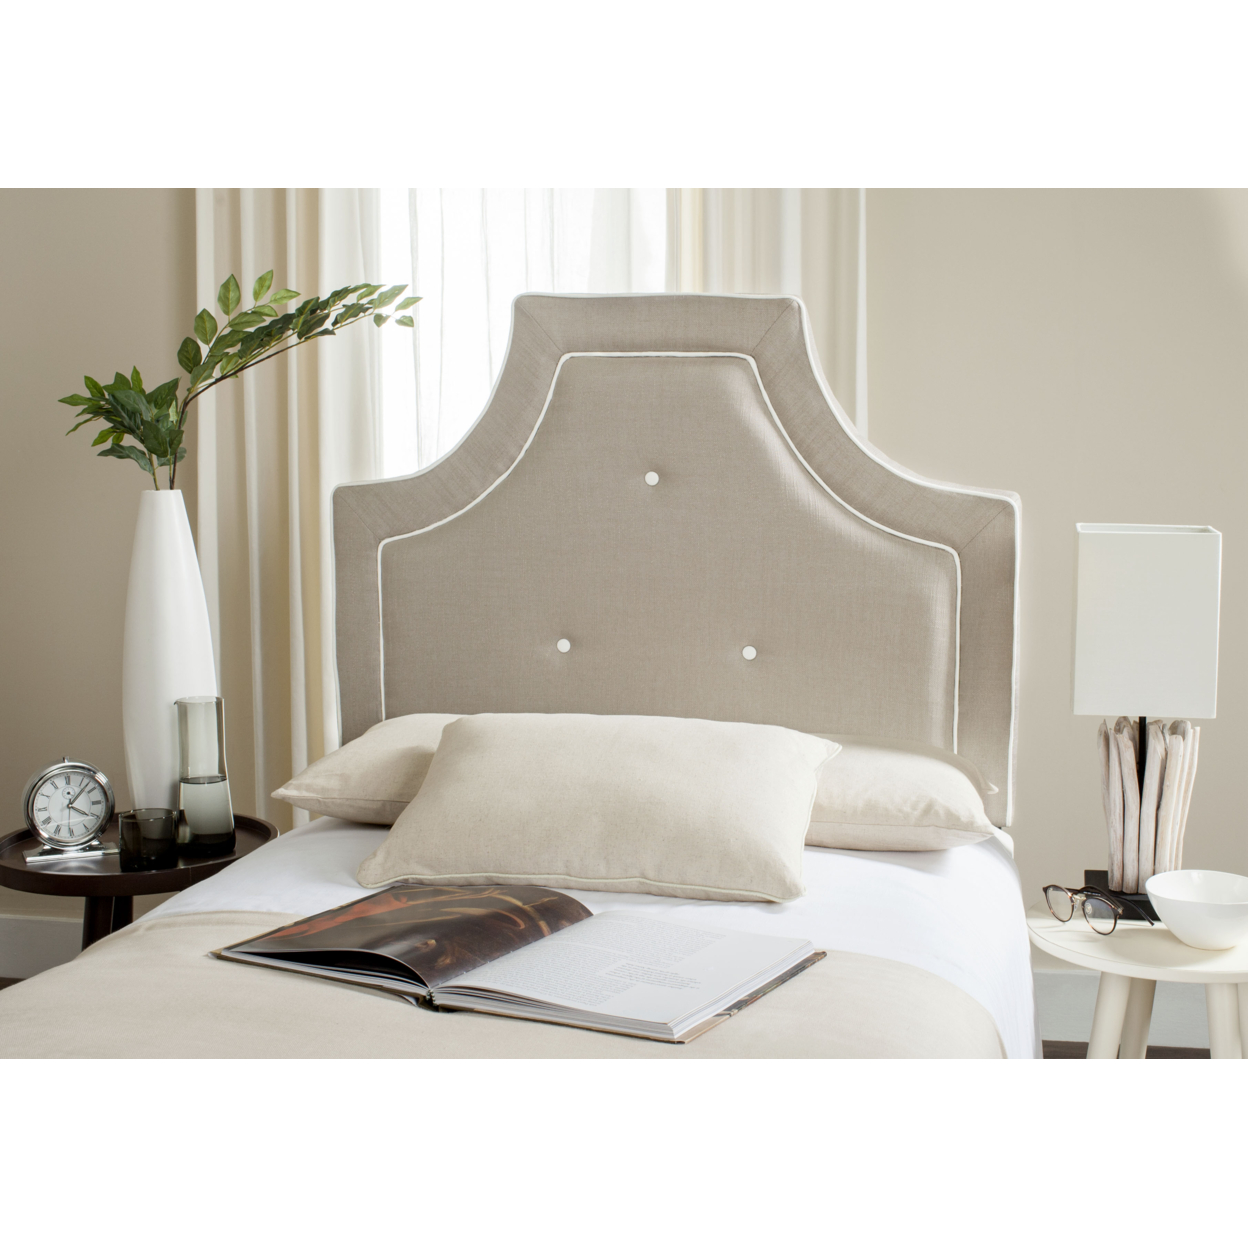 SAFAVIEH Tallulah Arched Headboard Light Oyster Grey / White King